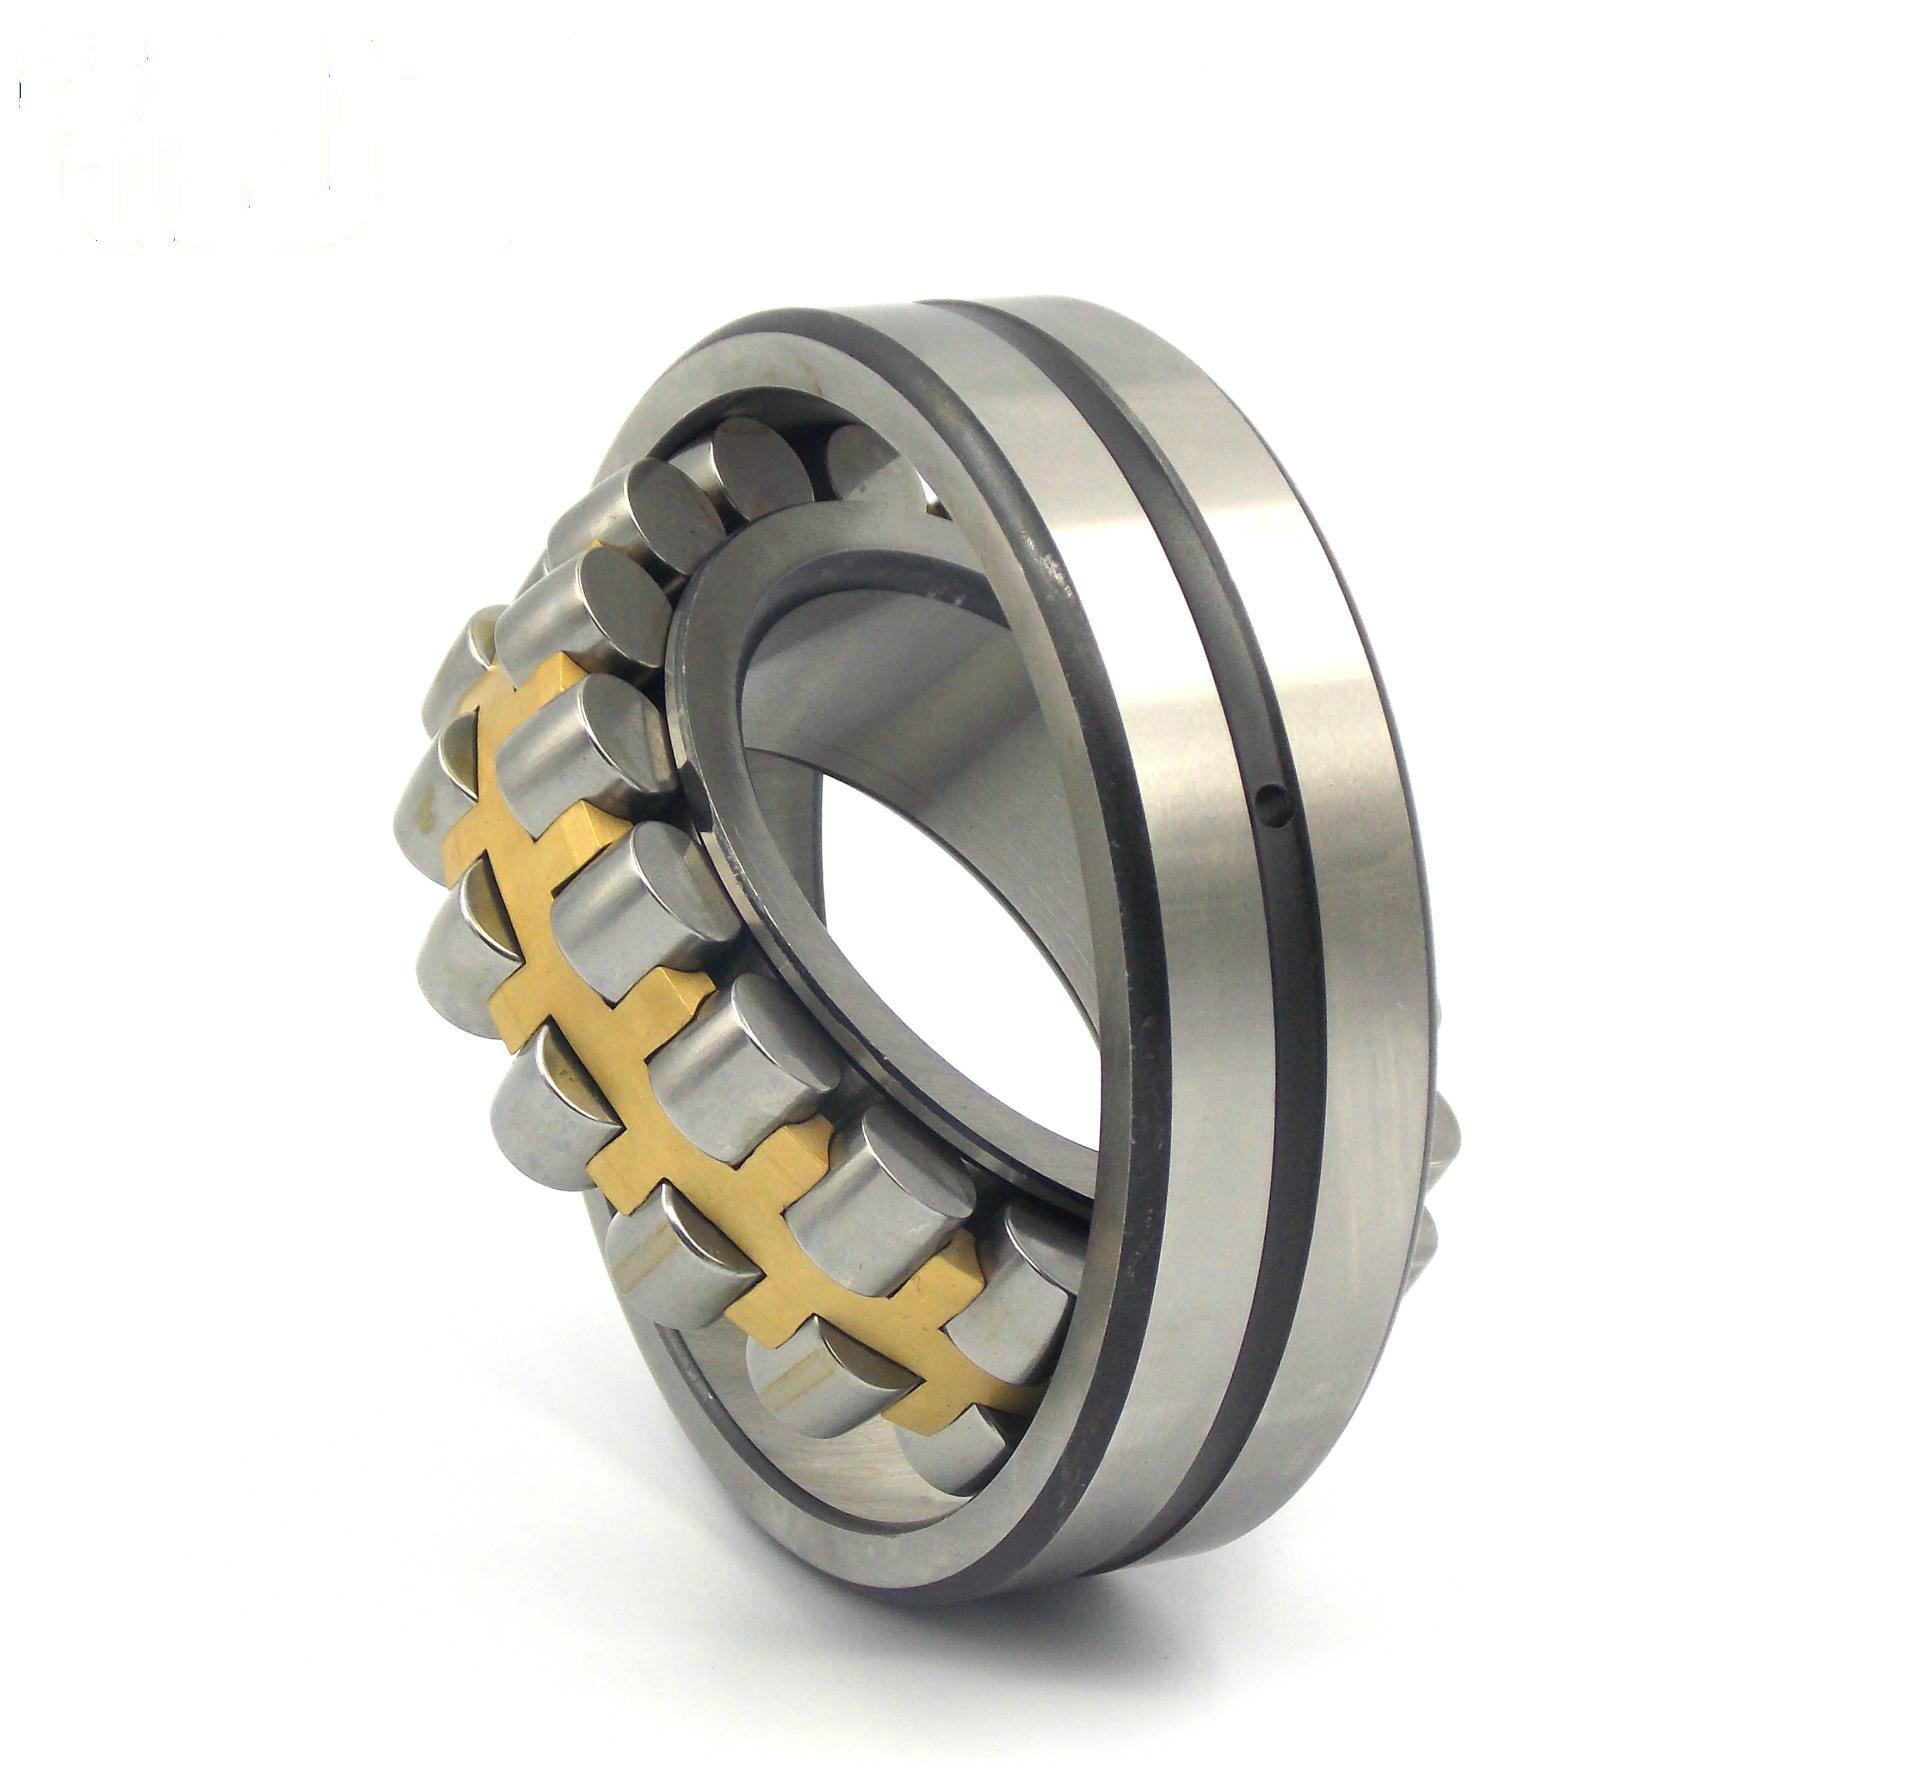  NU 224 M Cylindrical roller bearing